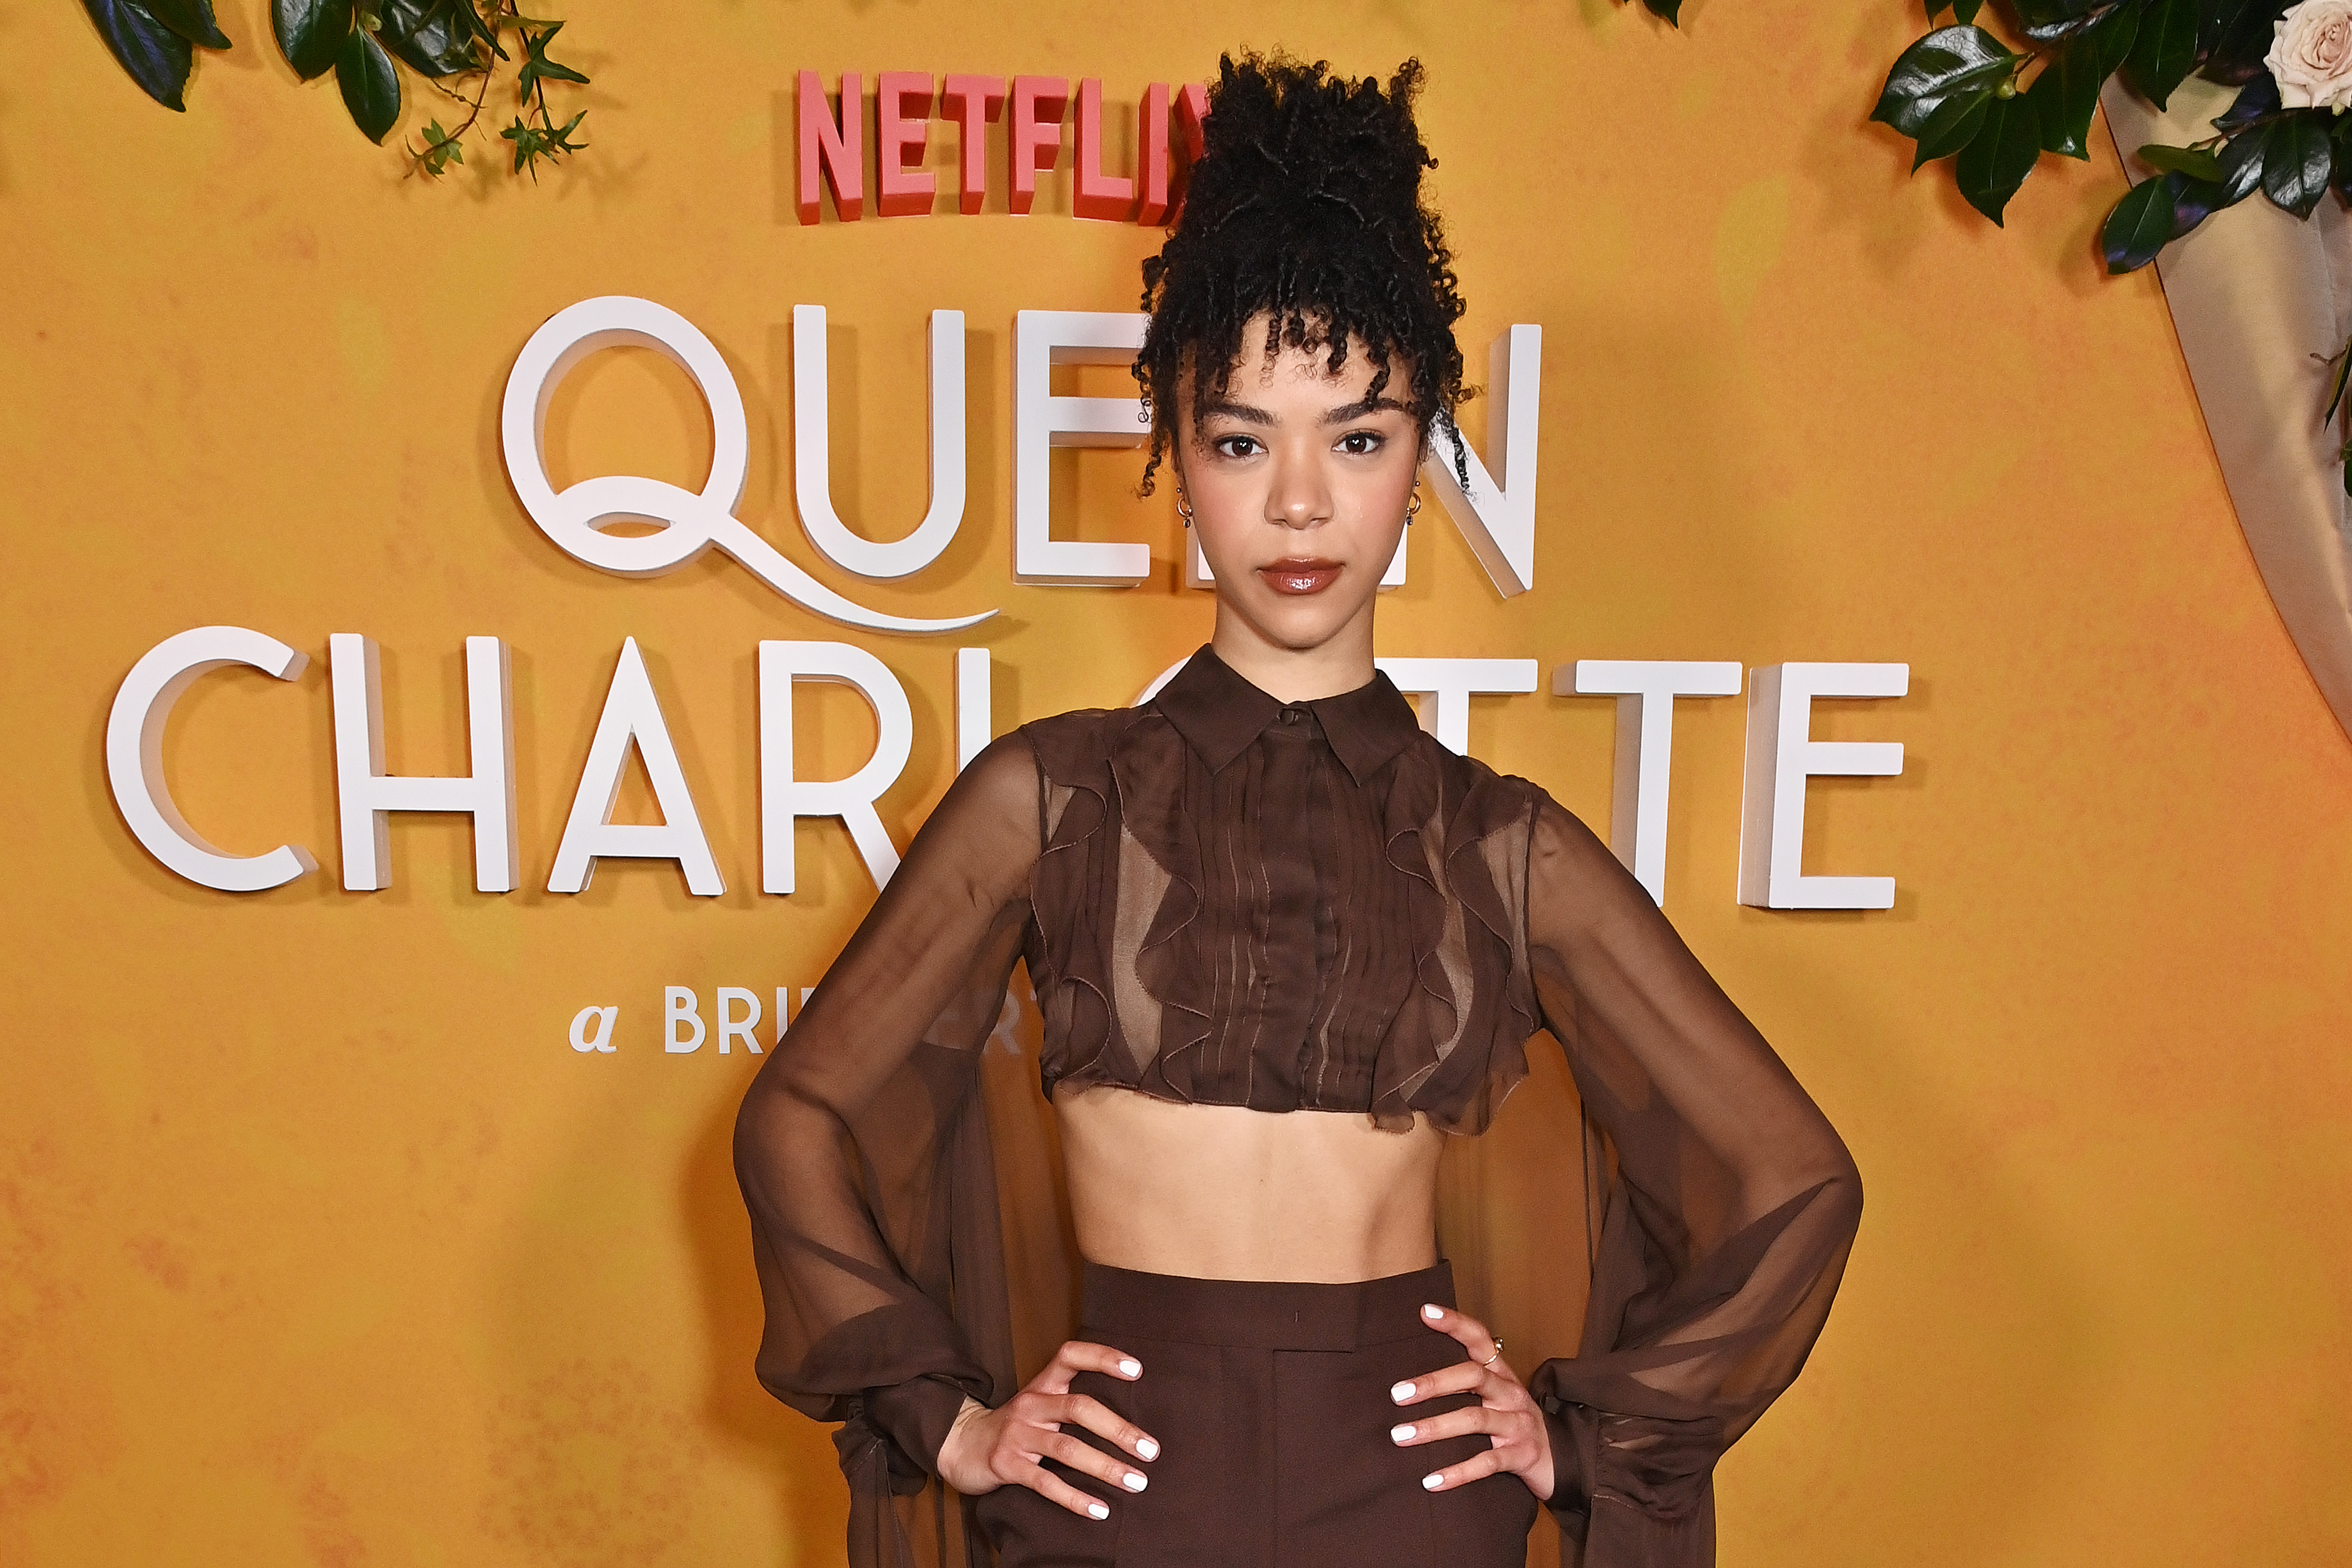 India Ria Amarteifio at the Valentine's Day Global Teaser Trailer Reveal for "Queen Charlotte: A Bridgerton Story" at Claridge's Hotel, on February 14, 2023, in London, England. | Source: Getty Images